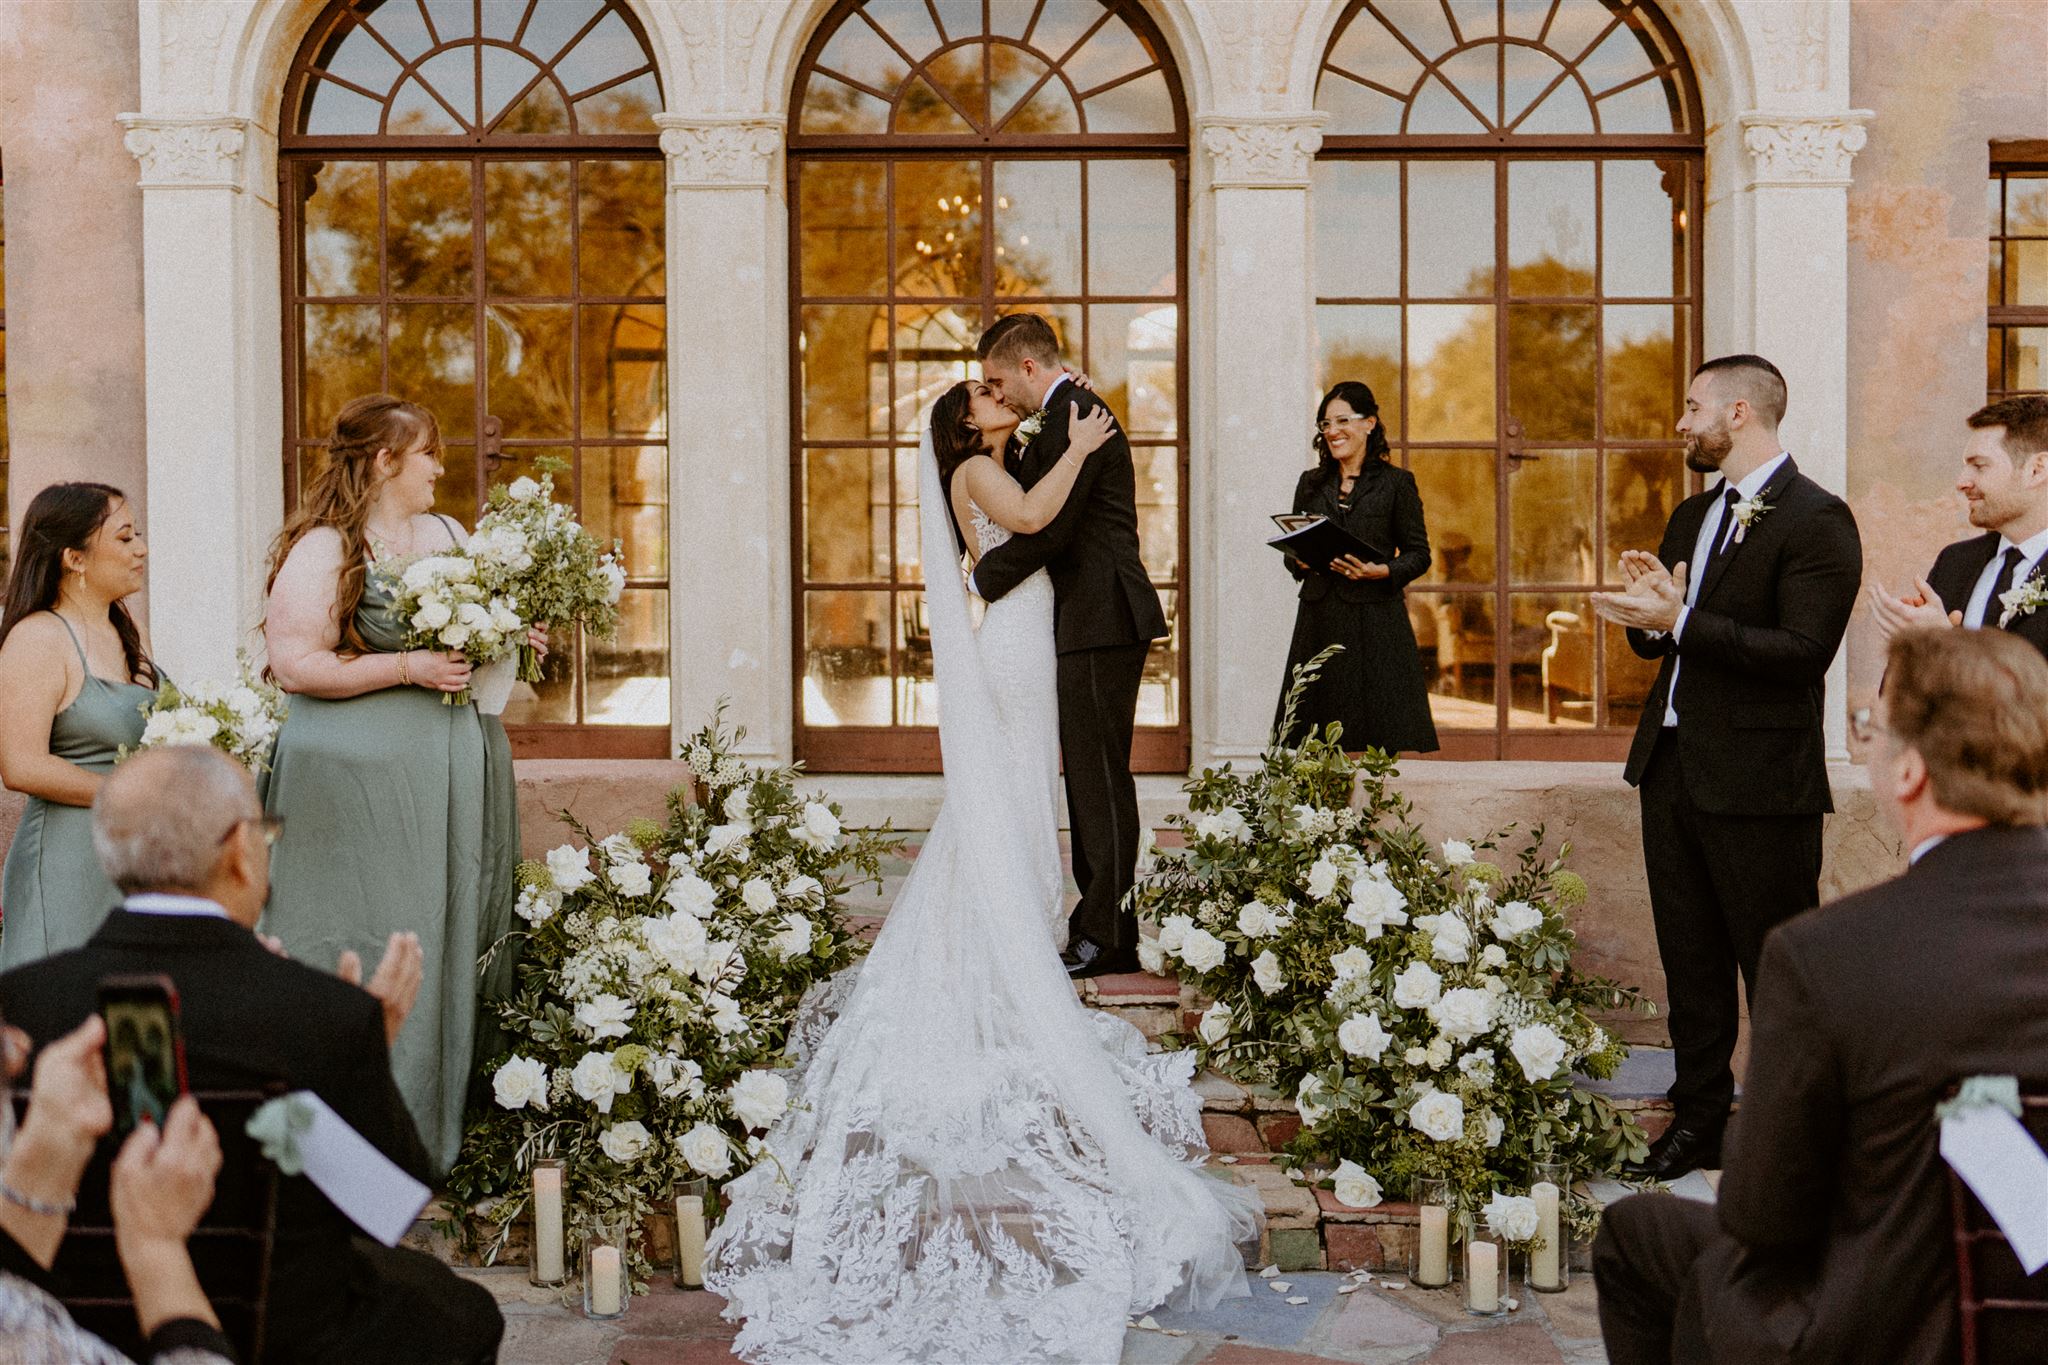 Bride and groom's first kiss in front of the Howey Mansion's rustic stone steps by the arch windows as the wind flows through the bride's veil